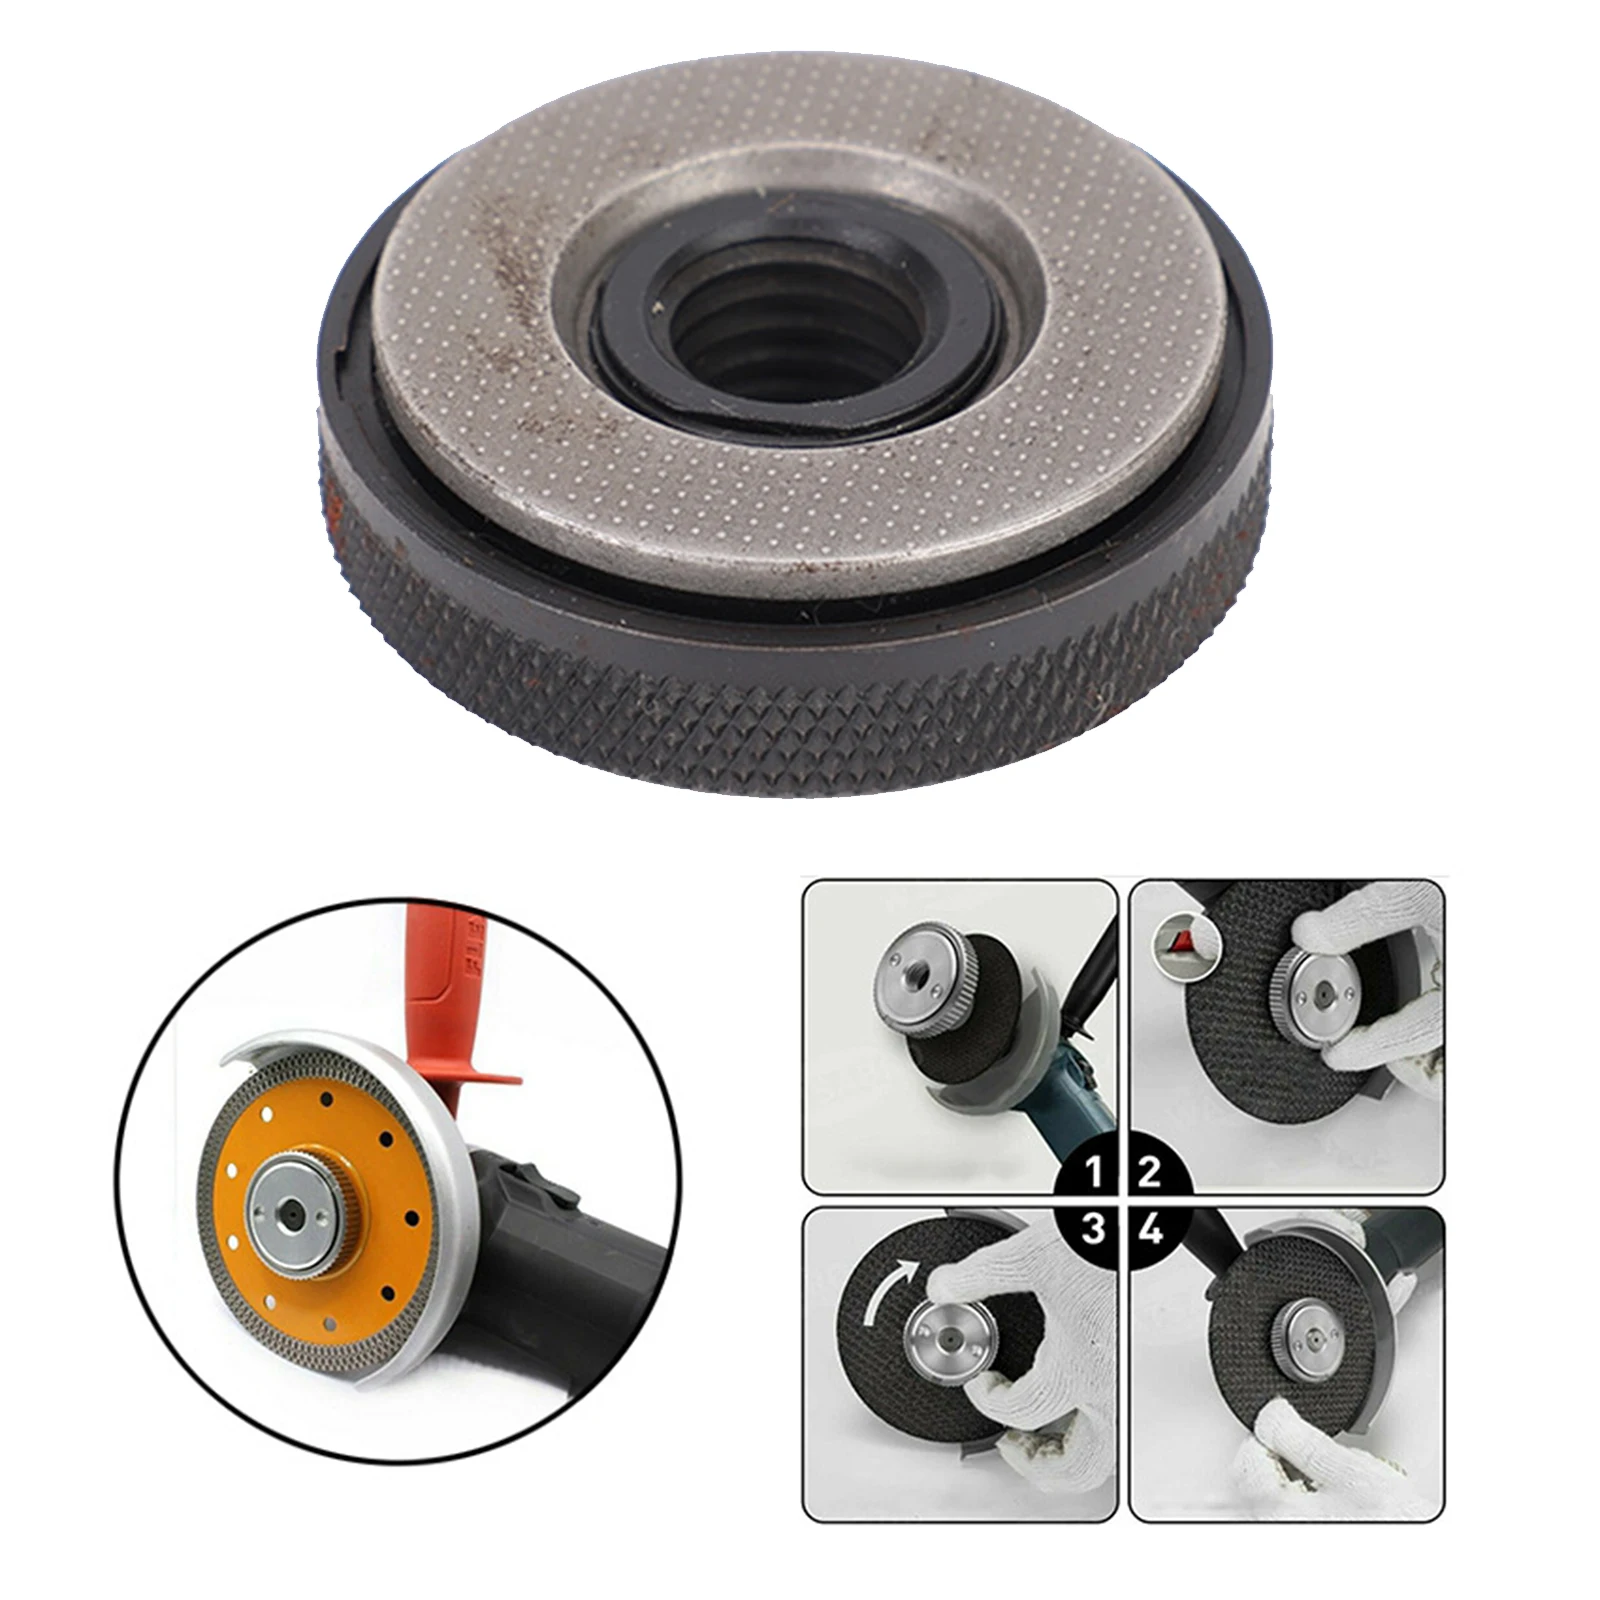 Quick Clamping Self Tightening Locking Nut Accessories forAngle Grinders